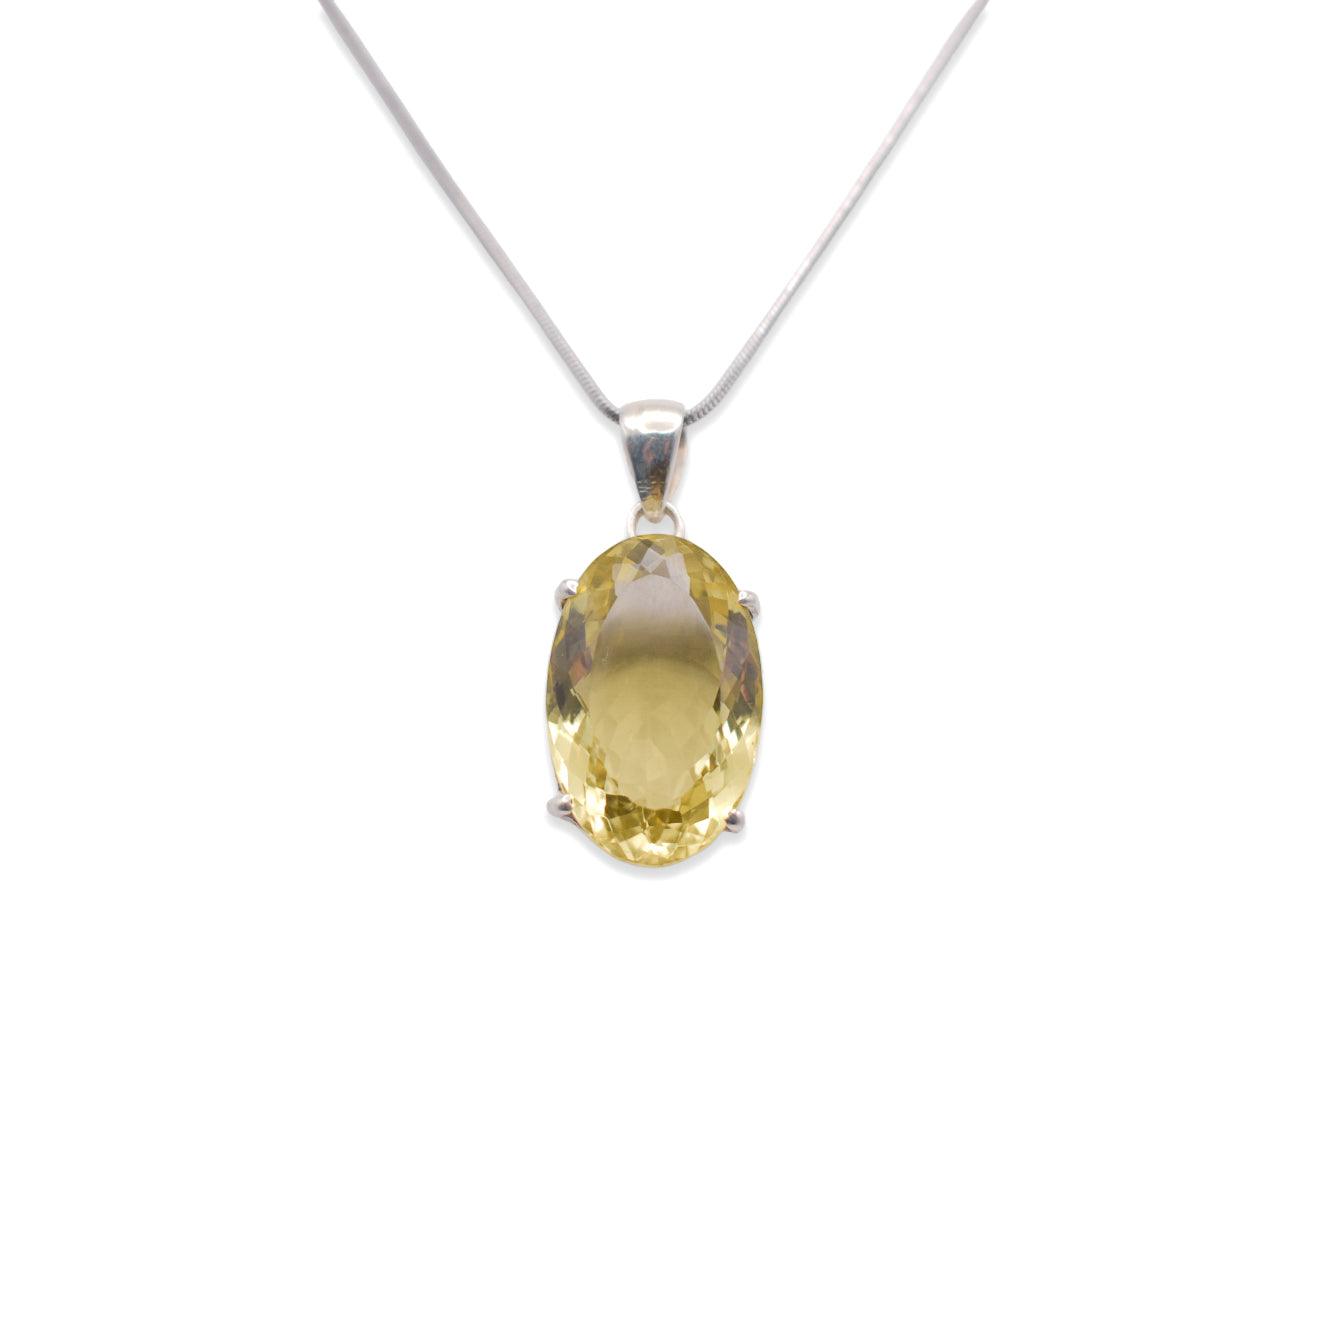 hanging 925 sterling silver lemon quartz pendant yellow color with silver chain on white background